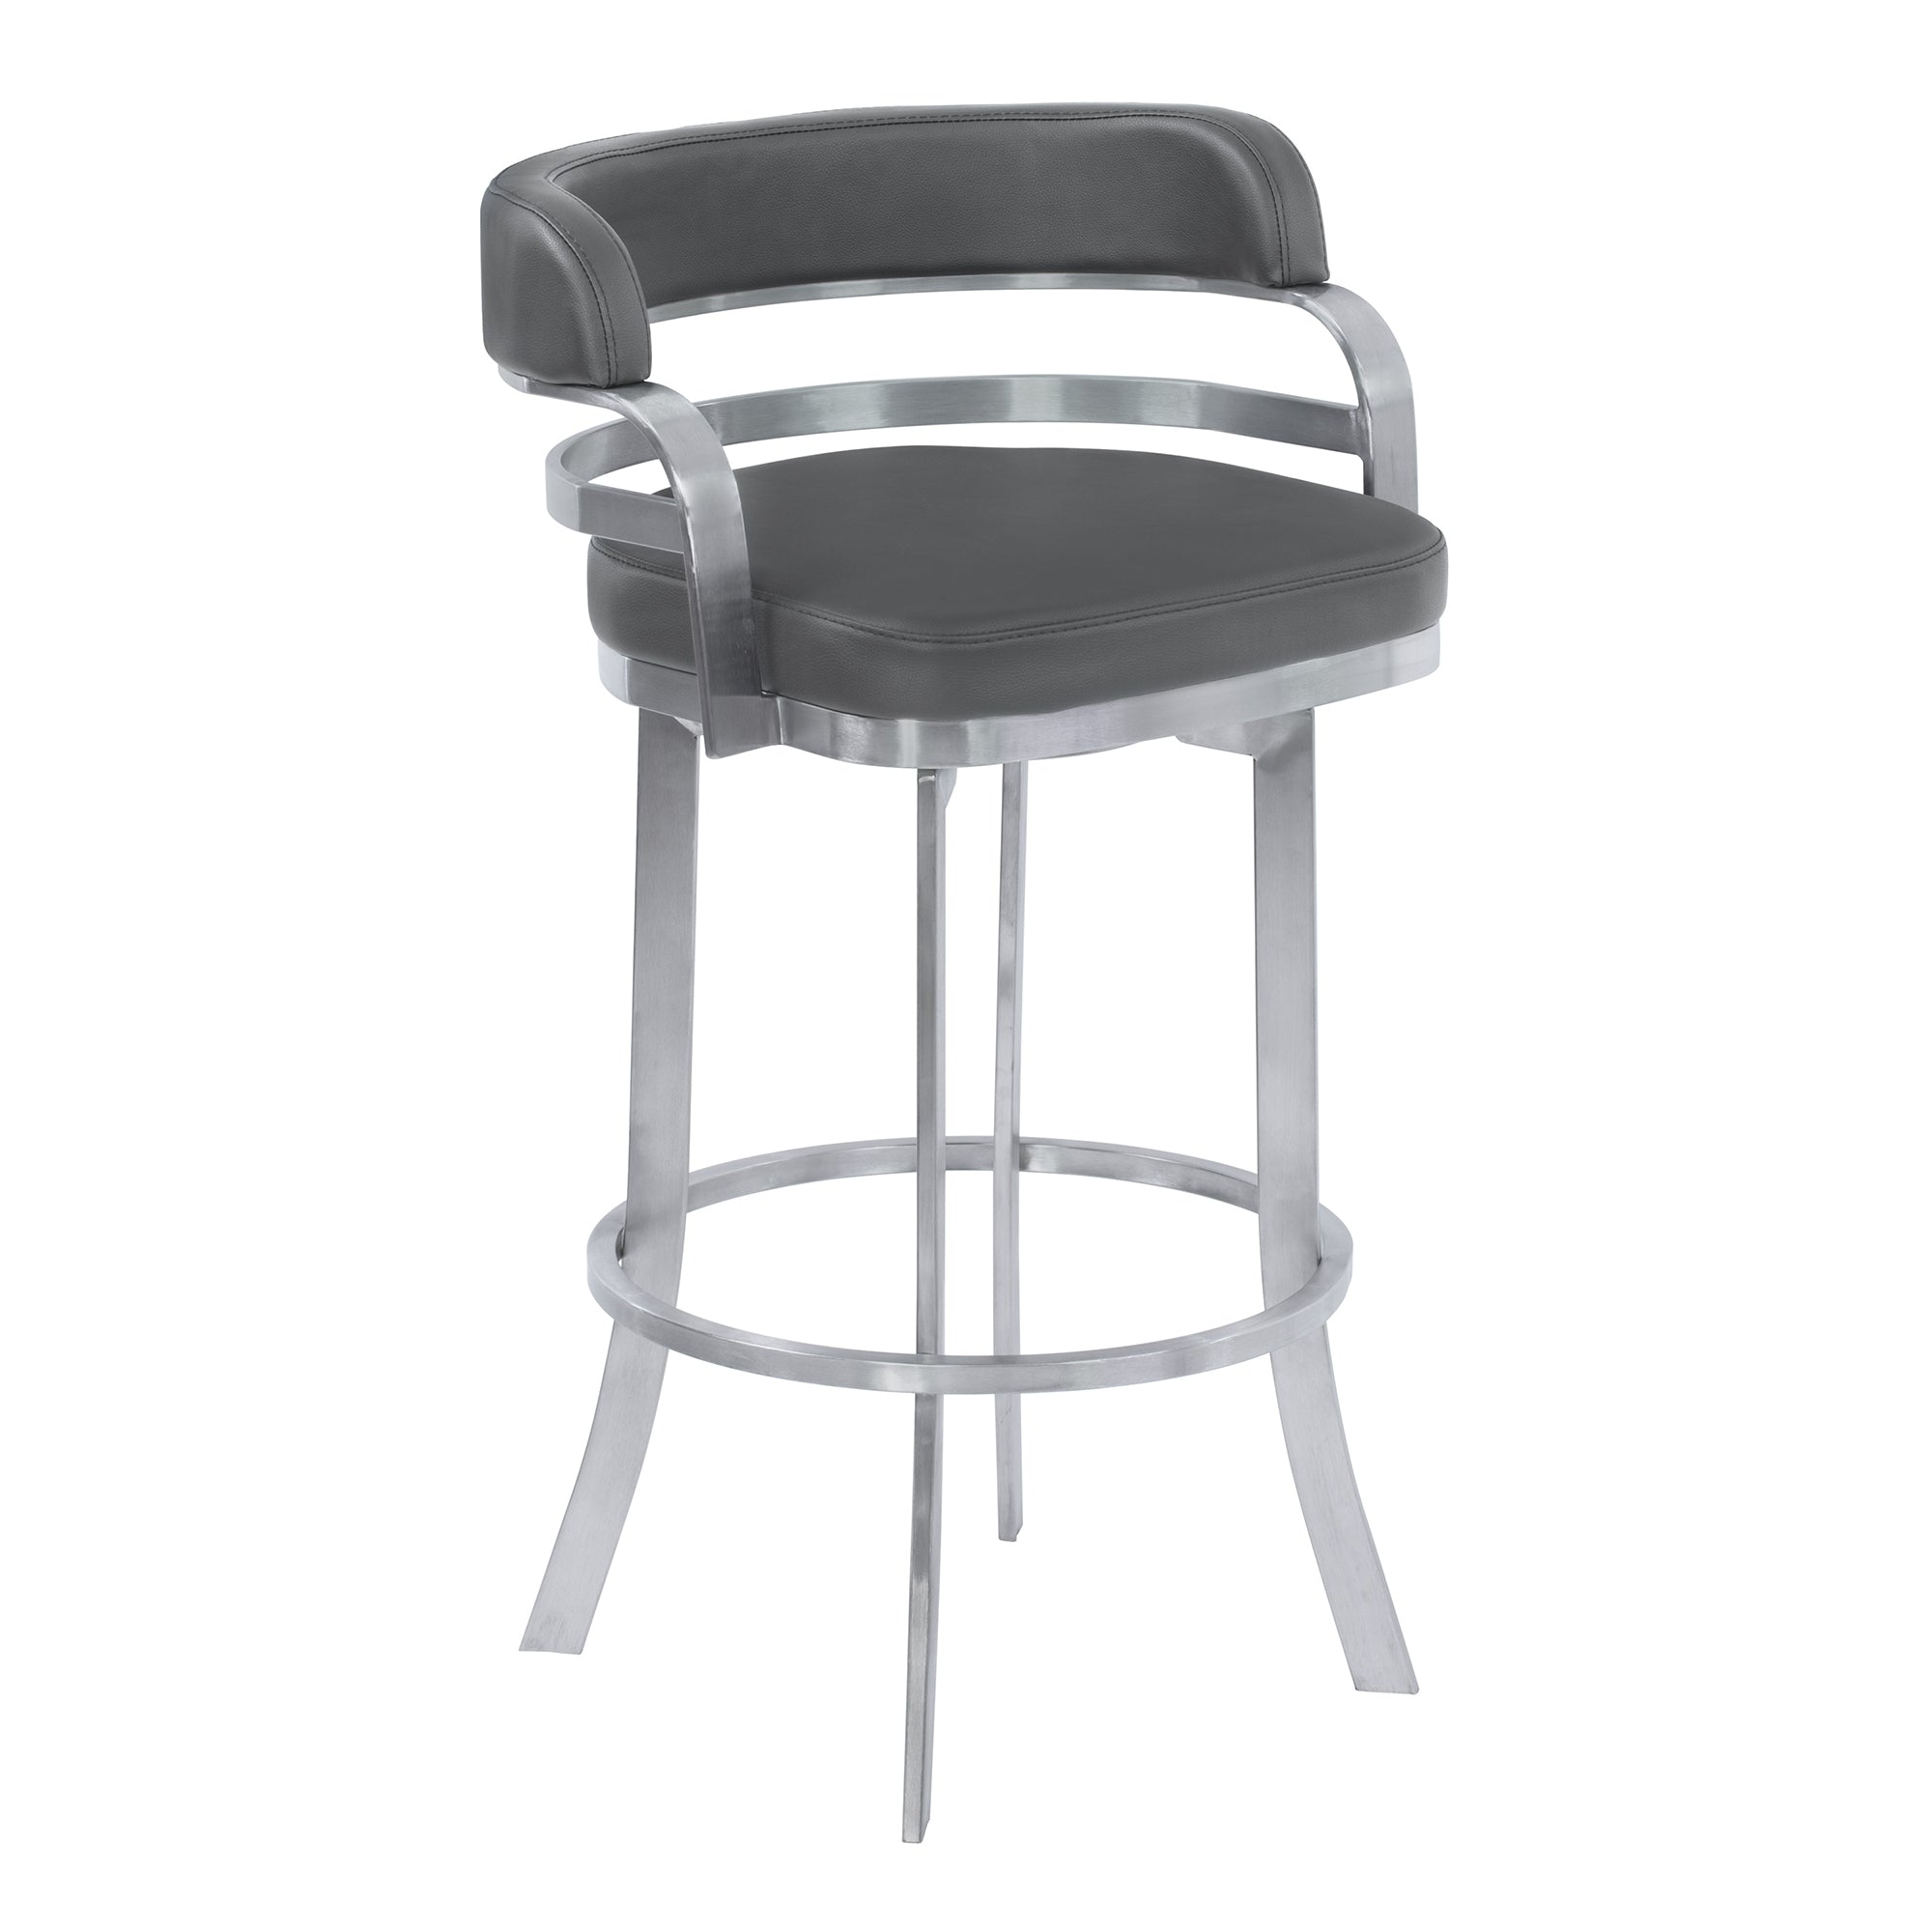 Armen Living Lcprbagrbs30 Prinz 30" Bar Height Metal Swivel Barstool In Gray Faux Leather With Brushed Stainless Steel Finish